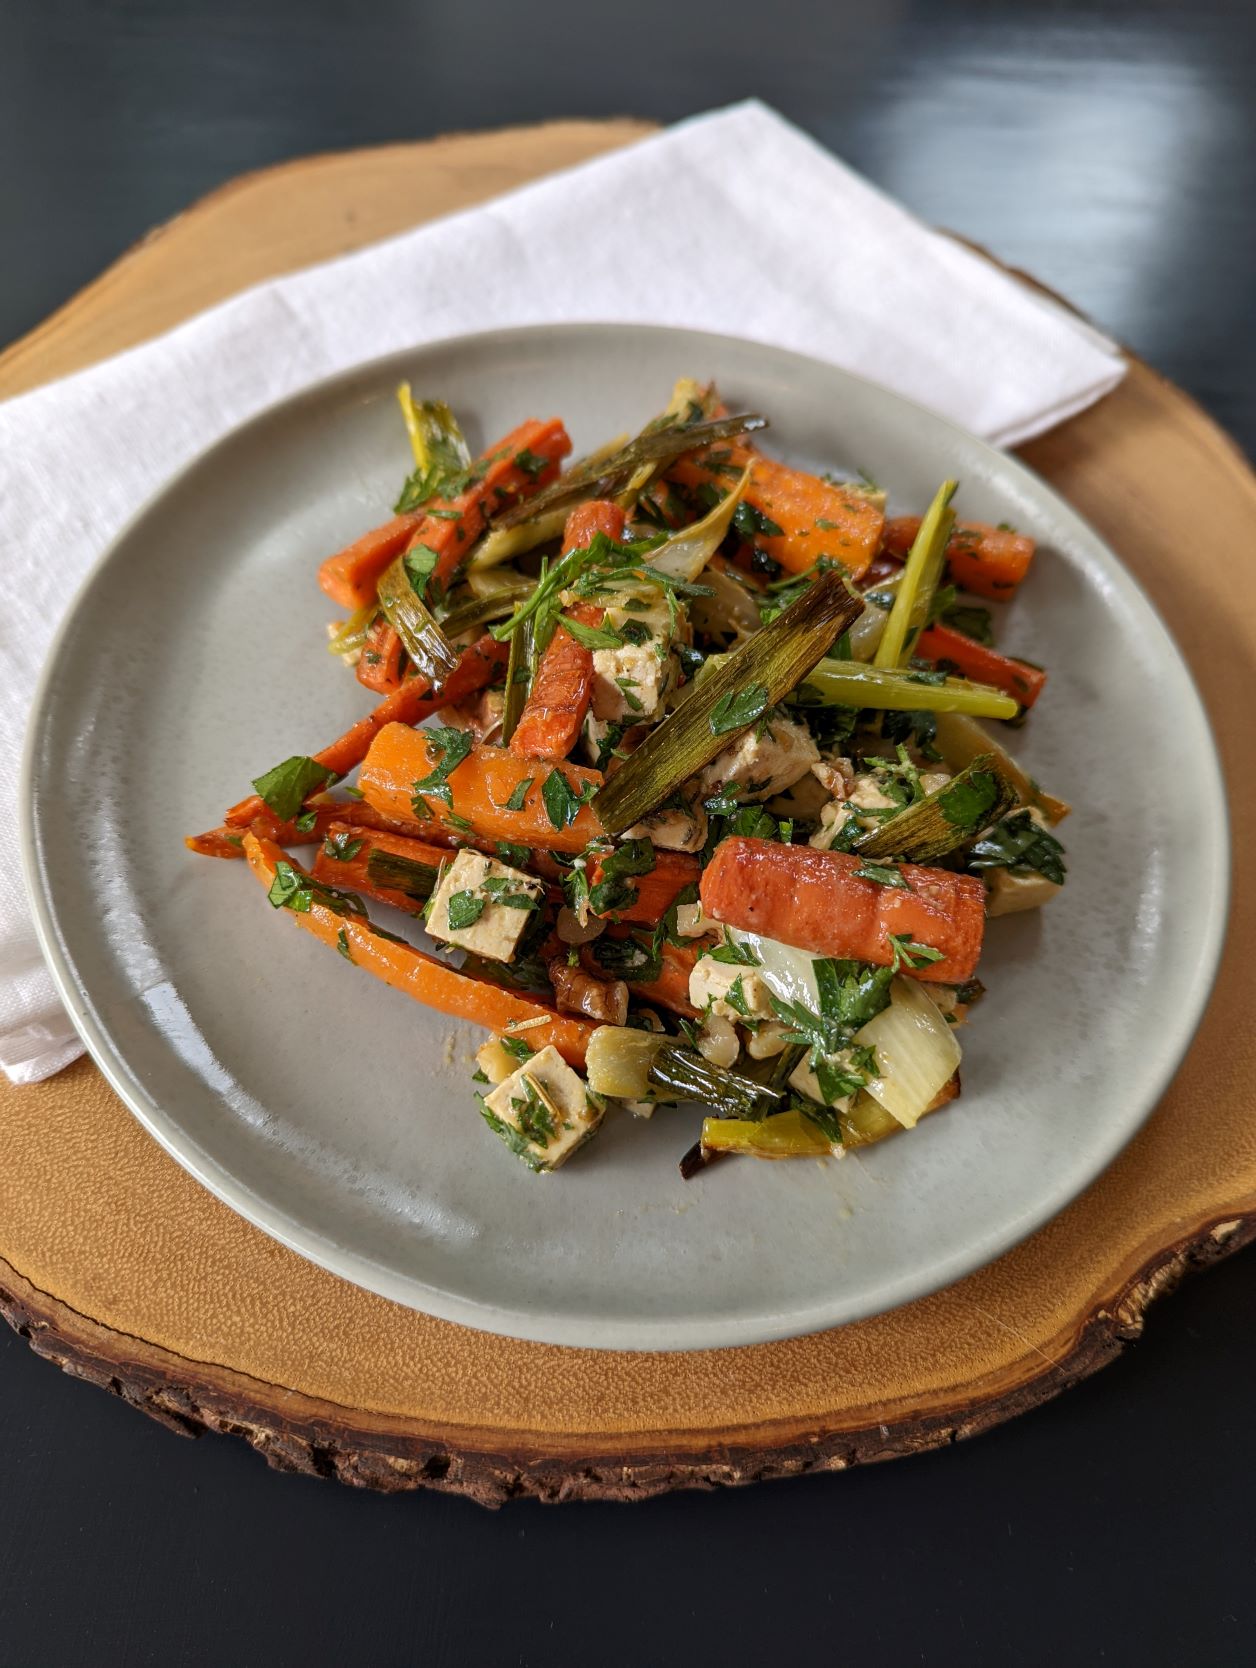 Roasted Carrot & Fennel Salad with Herby Tofu “Feta”